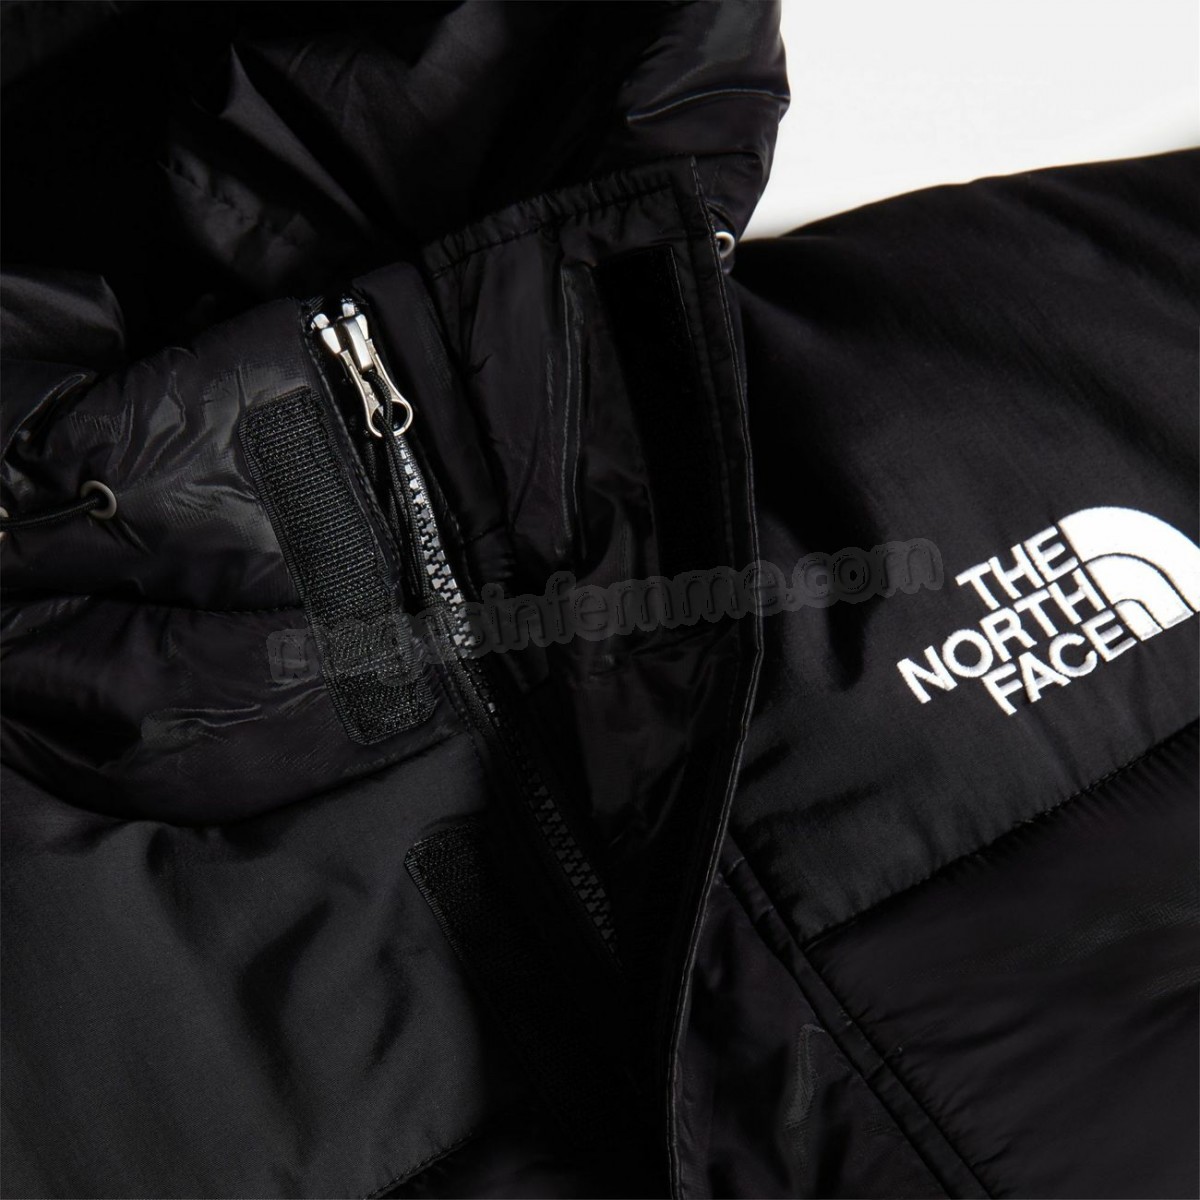 The North Face-mode homme THE NORTH FACE Himalayan Insulated Parka en solde - -26